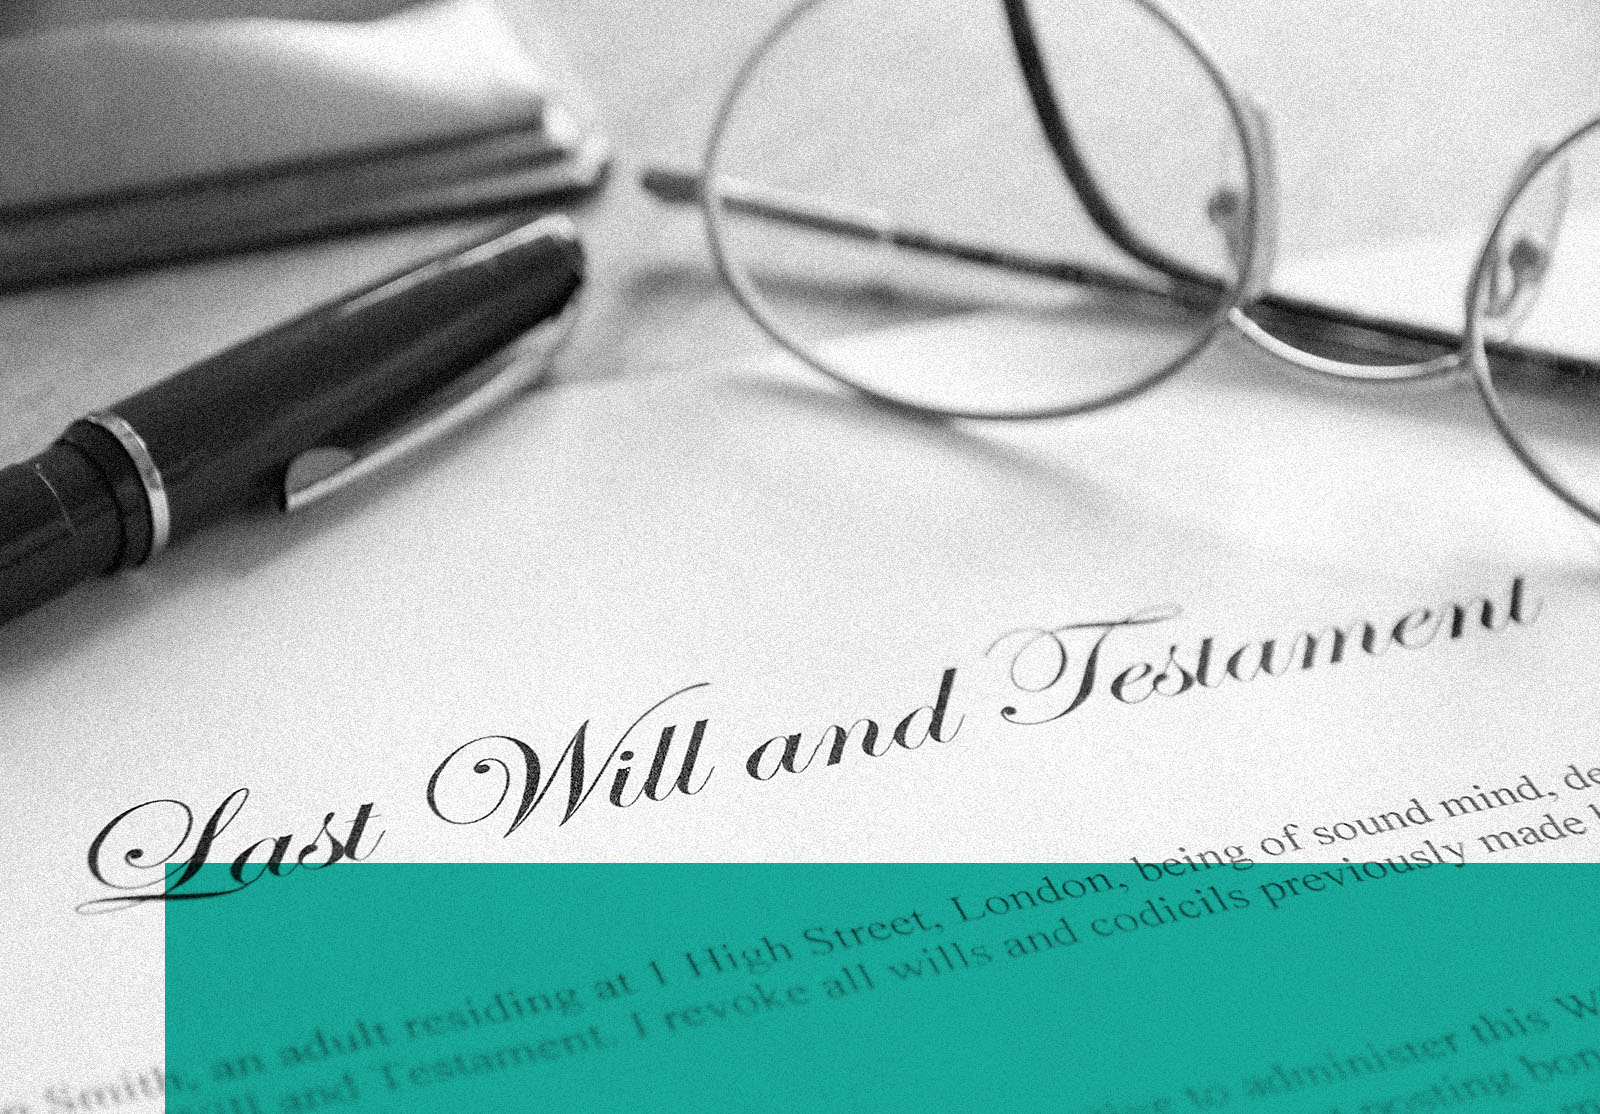 Last Will and Testament with spectacles and pen.